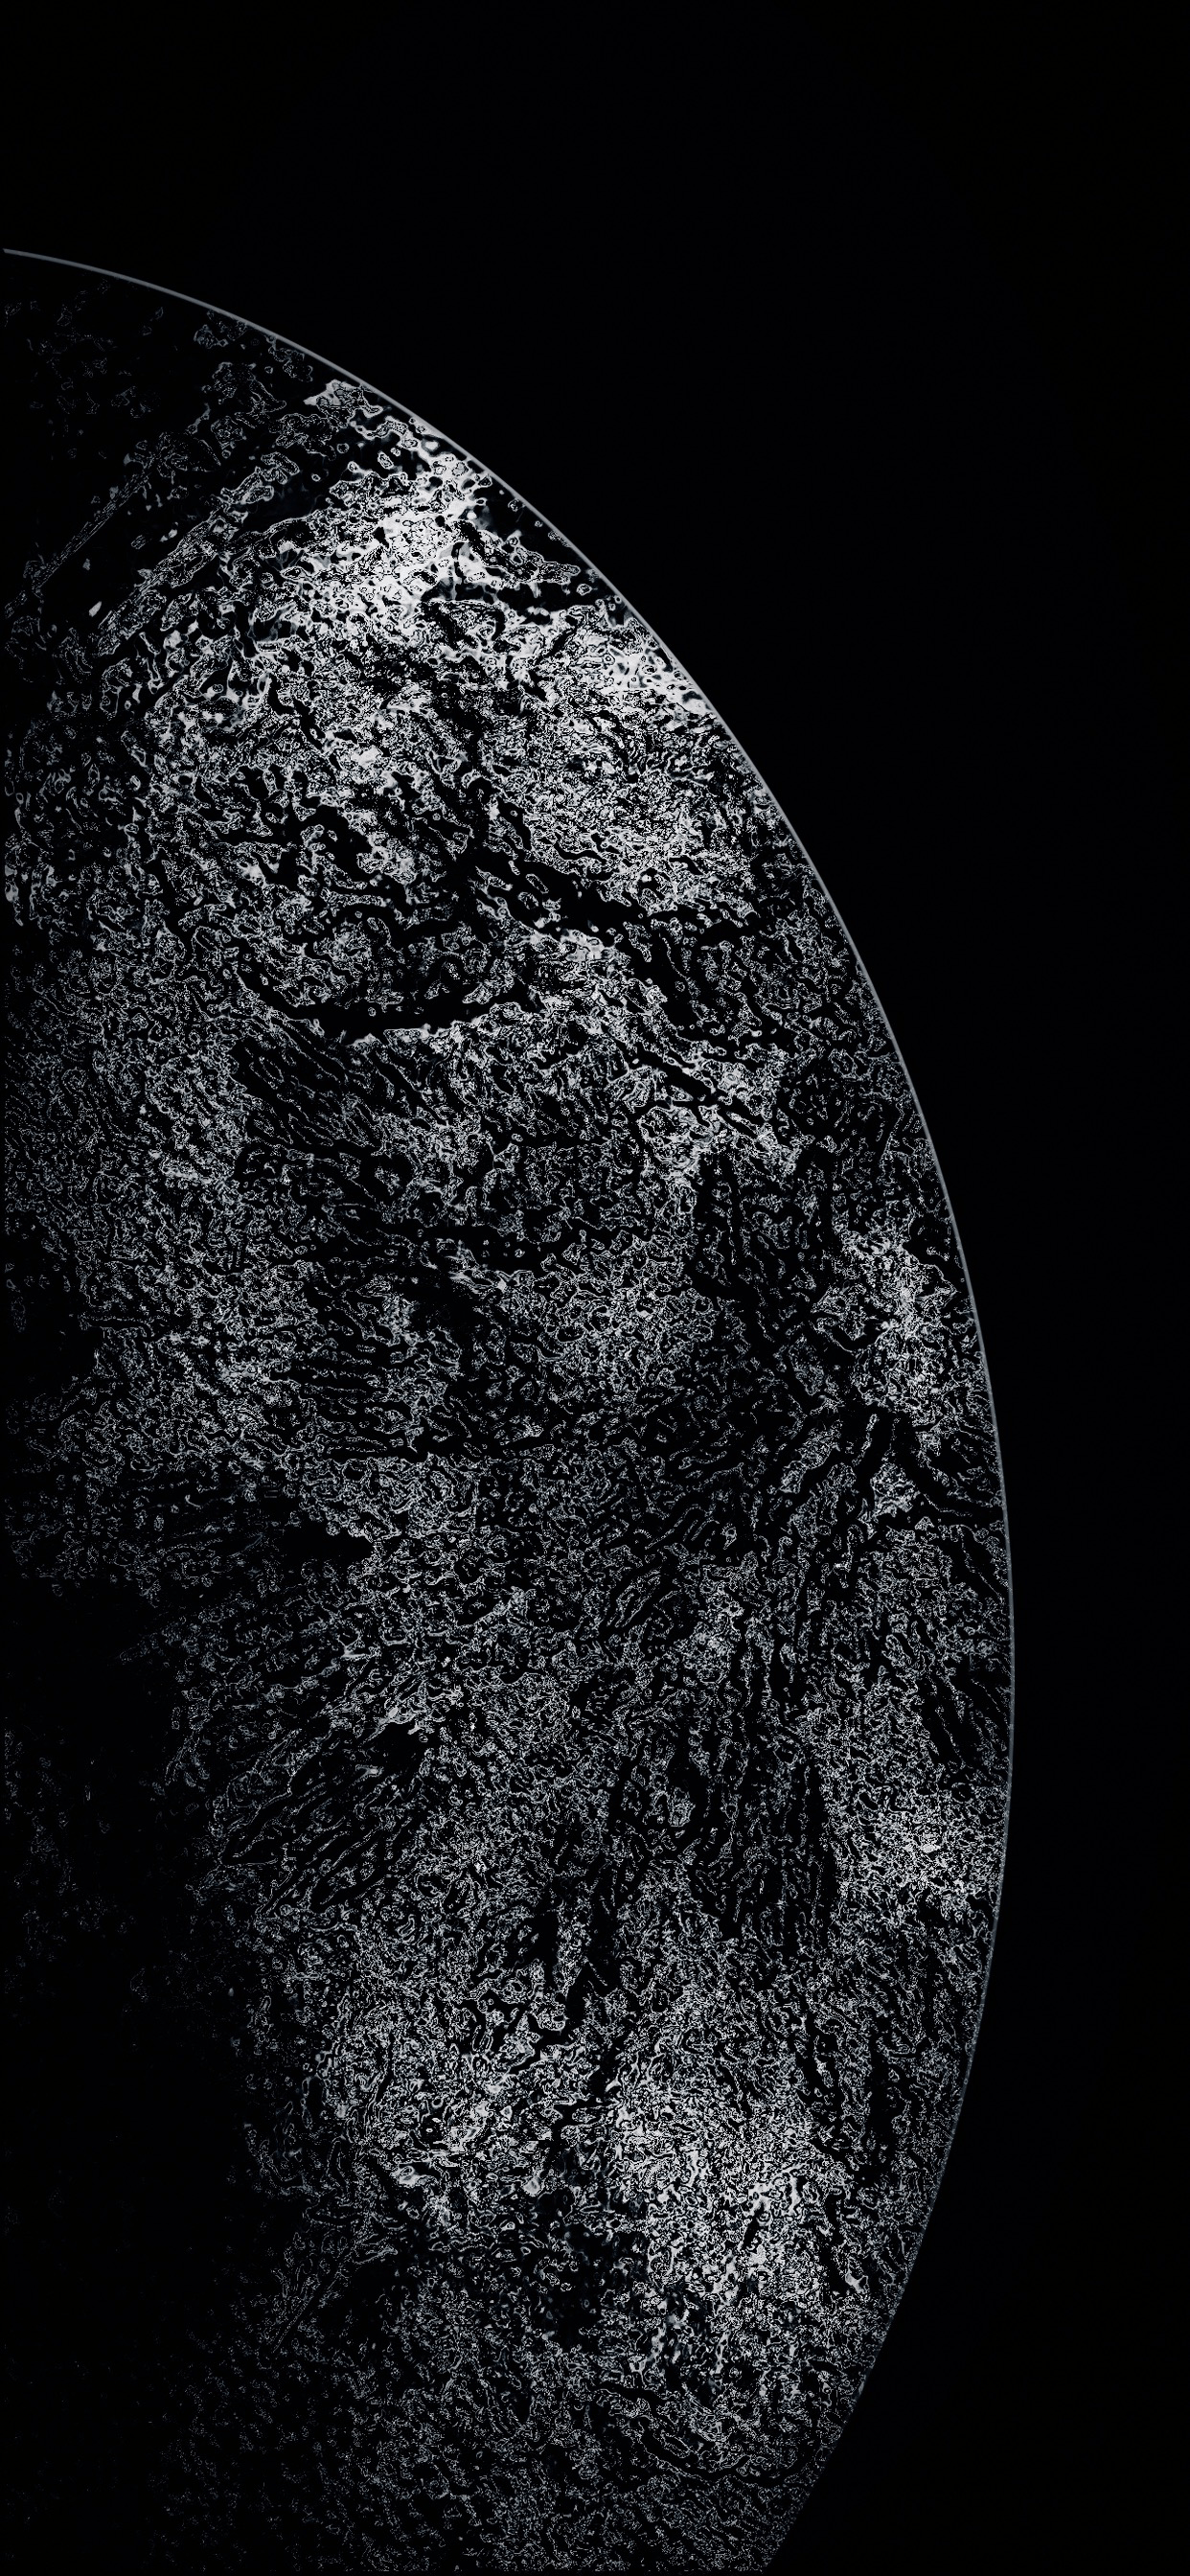 Iphone Xs Wallpaper Black And White : A collection of the top 30 iphone